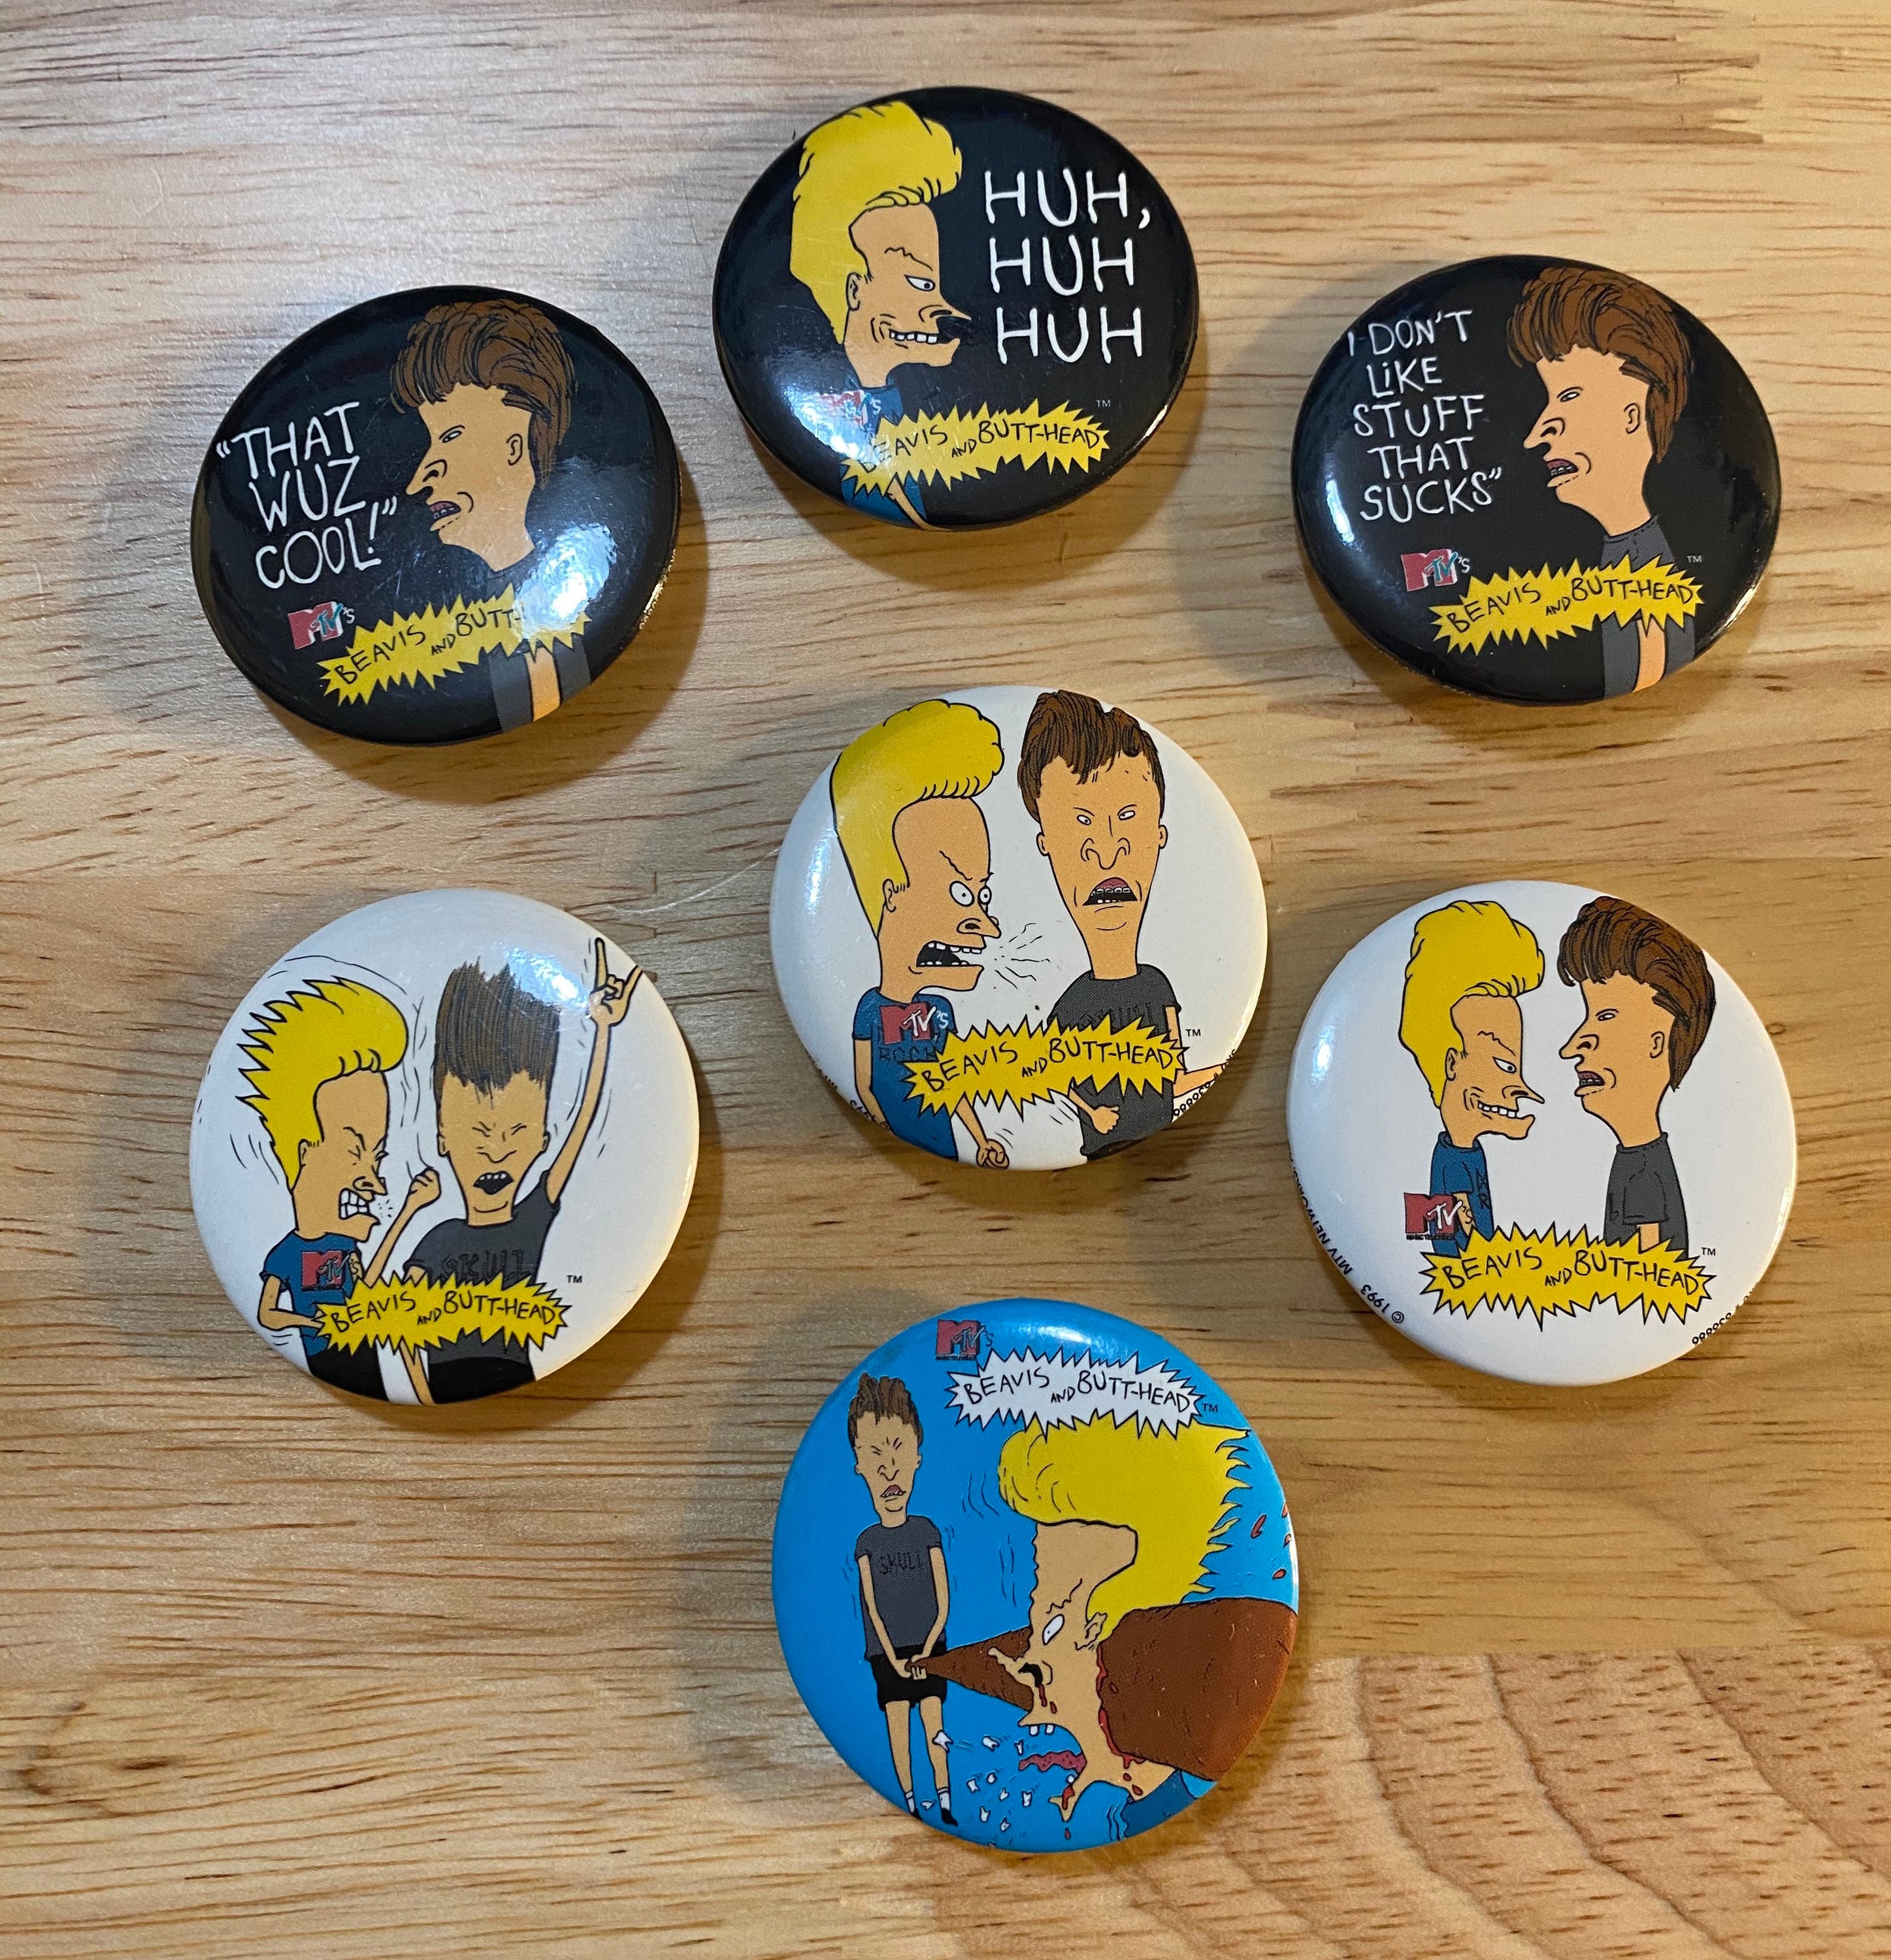 Beavis and Butthead Vintage 90s Pin Button